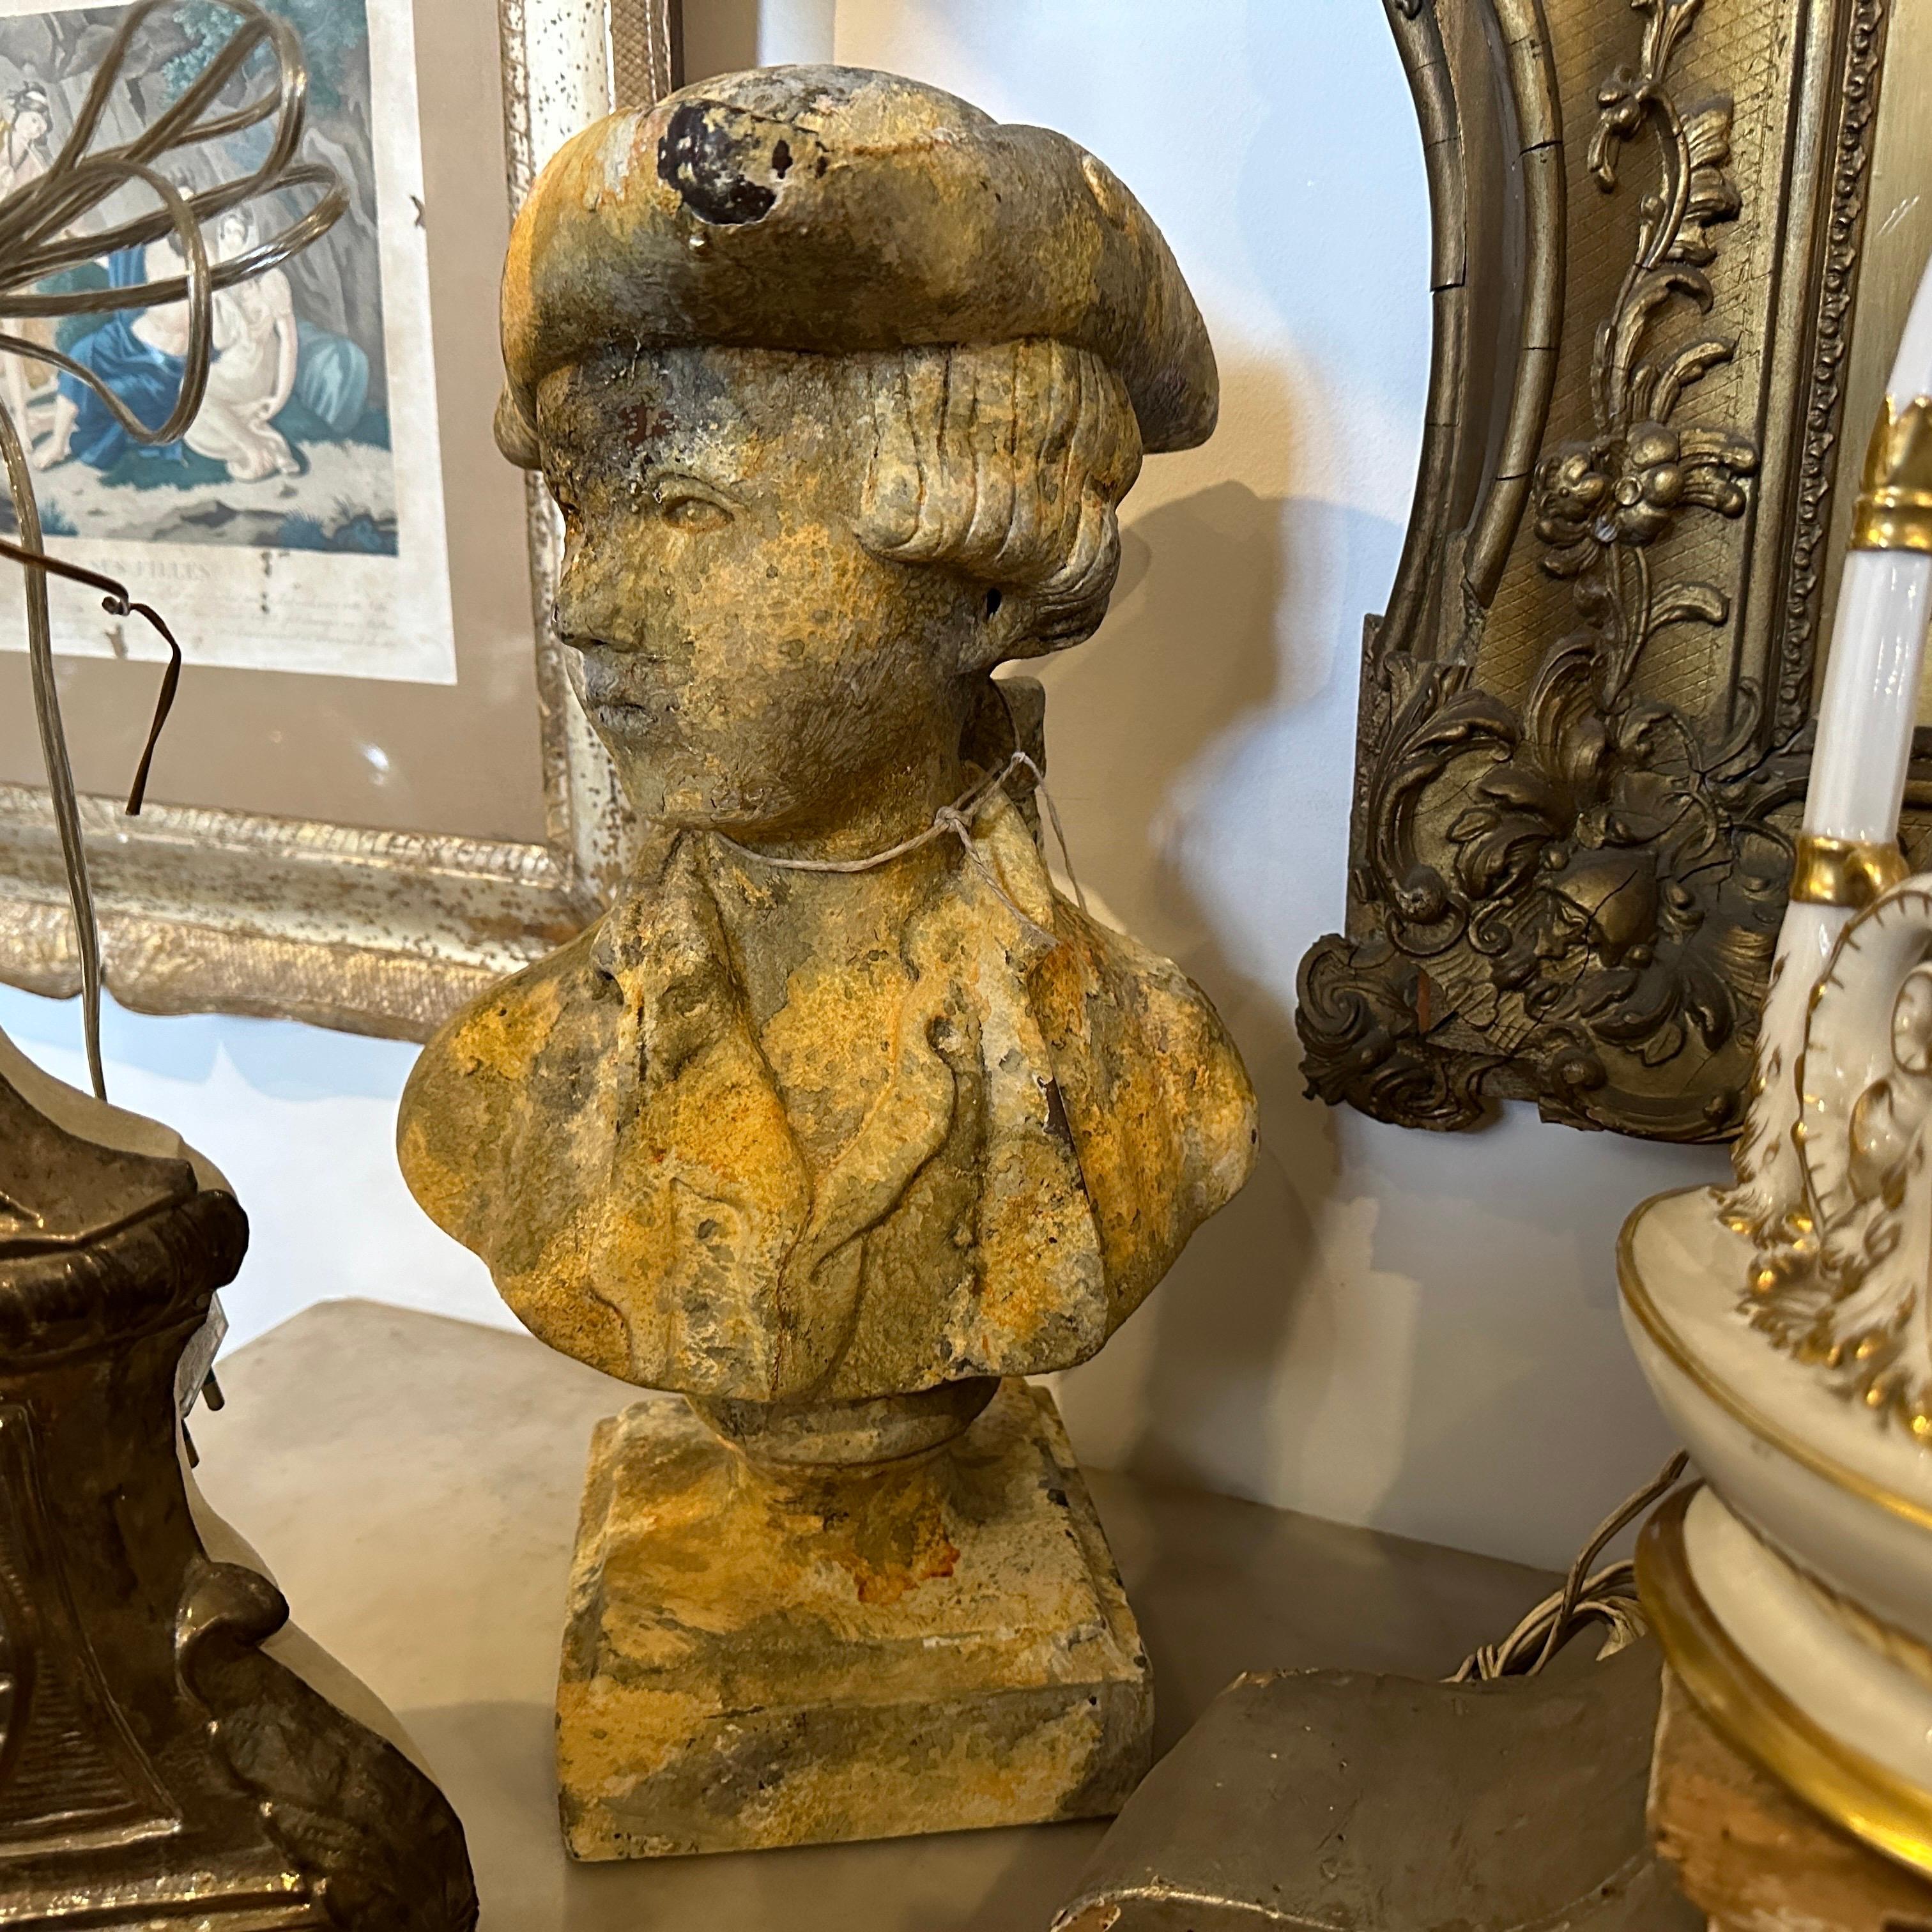 This Art Nouveau Italian bust embodies the movement's hallmark features and also incorporating elements influenced by Italian art and culture. Their historical and artistic value makes them not just sculptures but artifacts that capture the essence